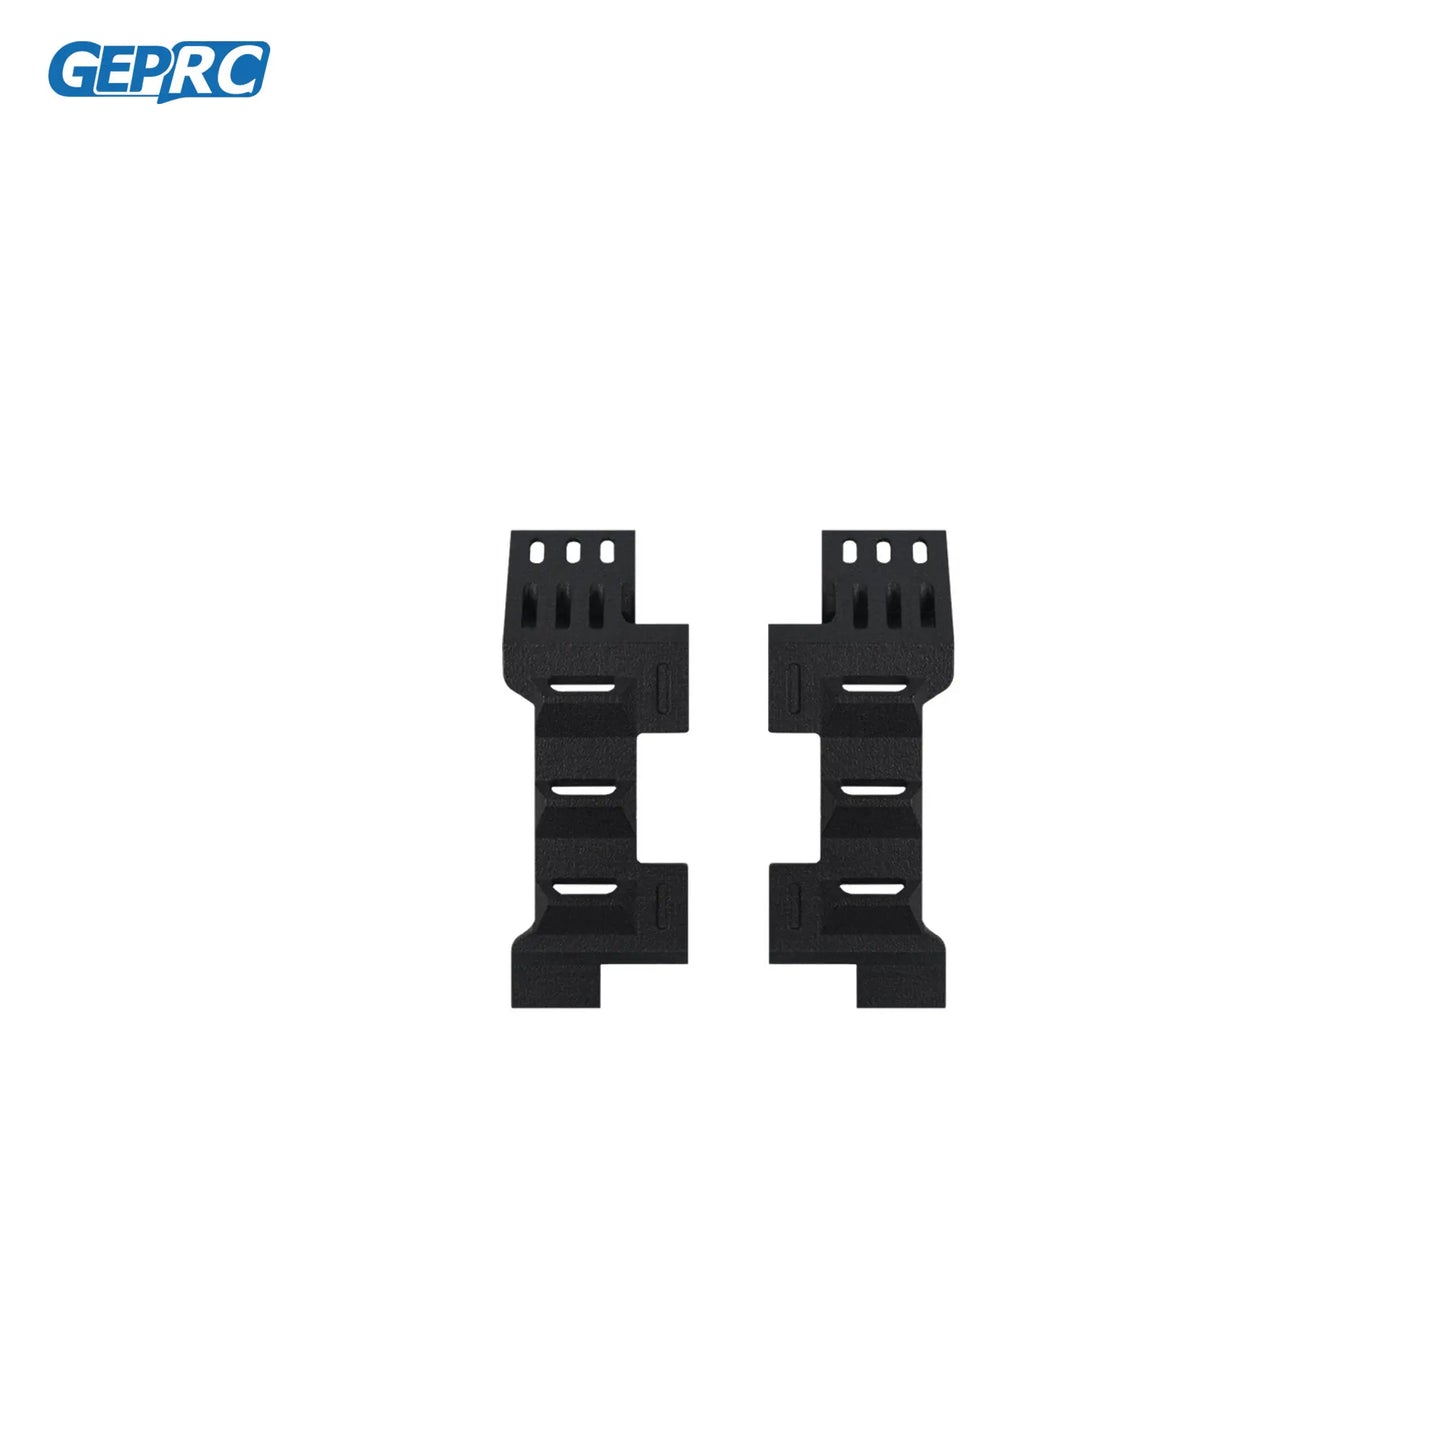 GEPRC GEP-LC75 V3 Frame Parts - Suitable for Crocodile75 V3 Drone RC DIY FPV Quadcopter Drone Replacement Accessories Parts